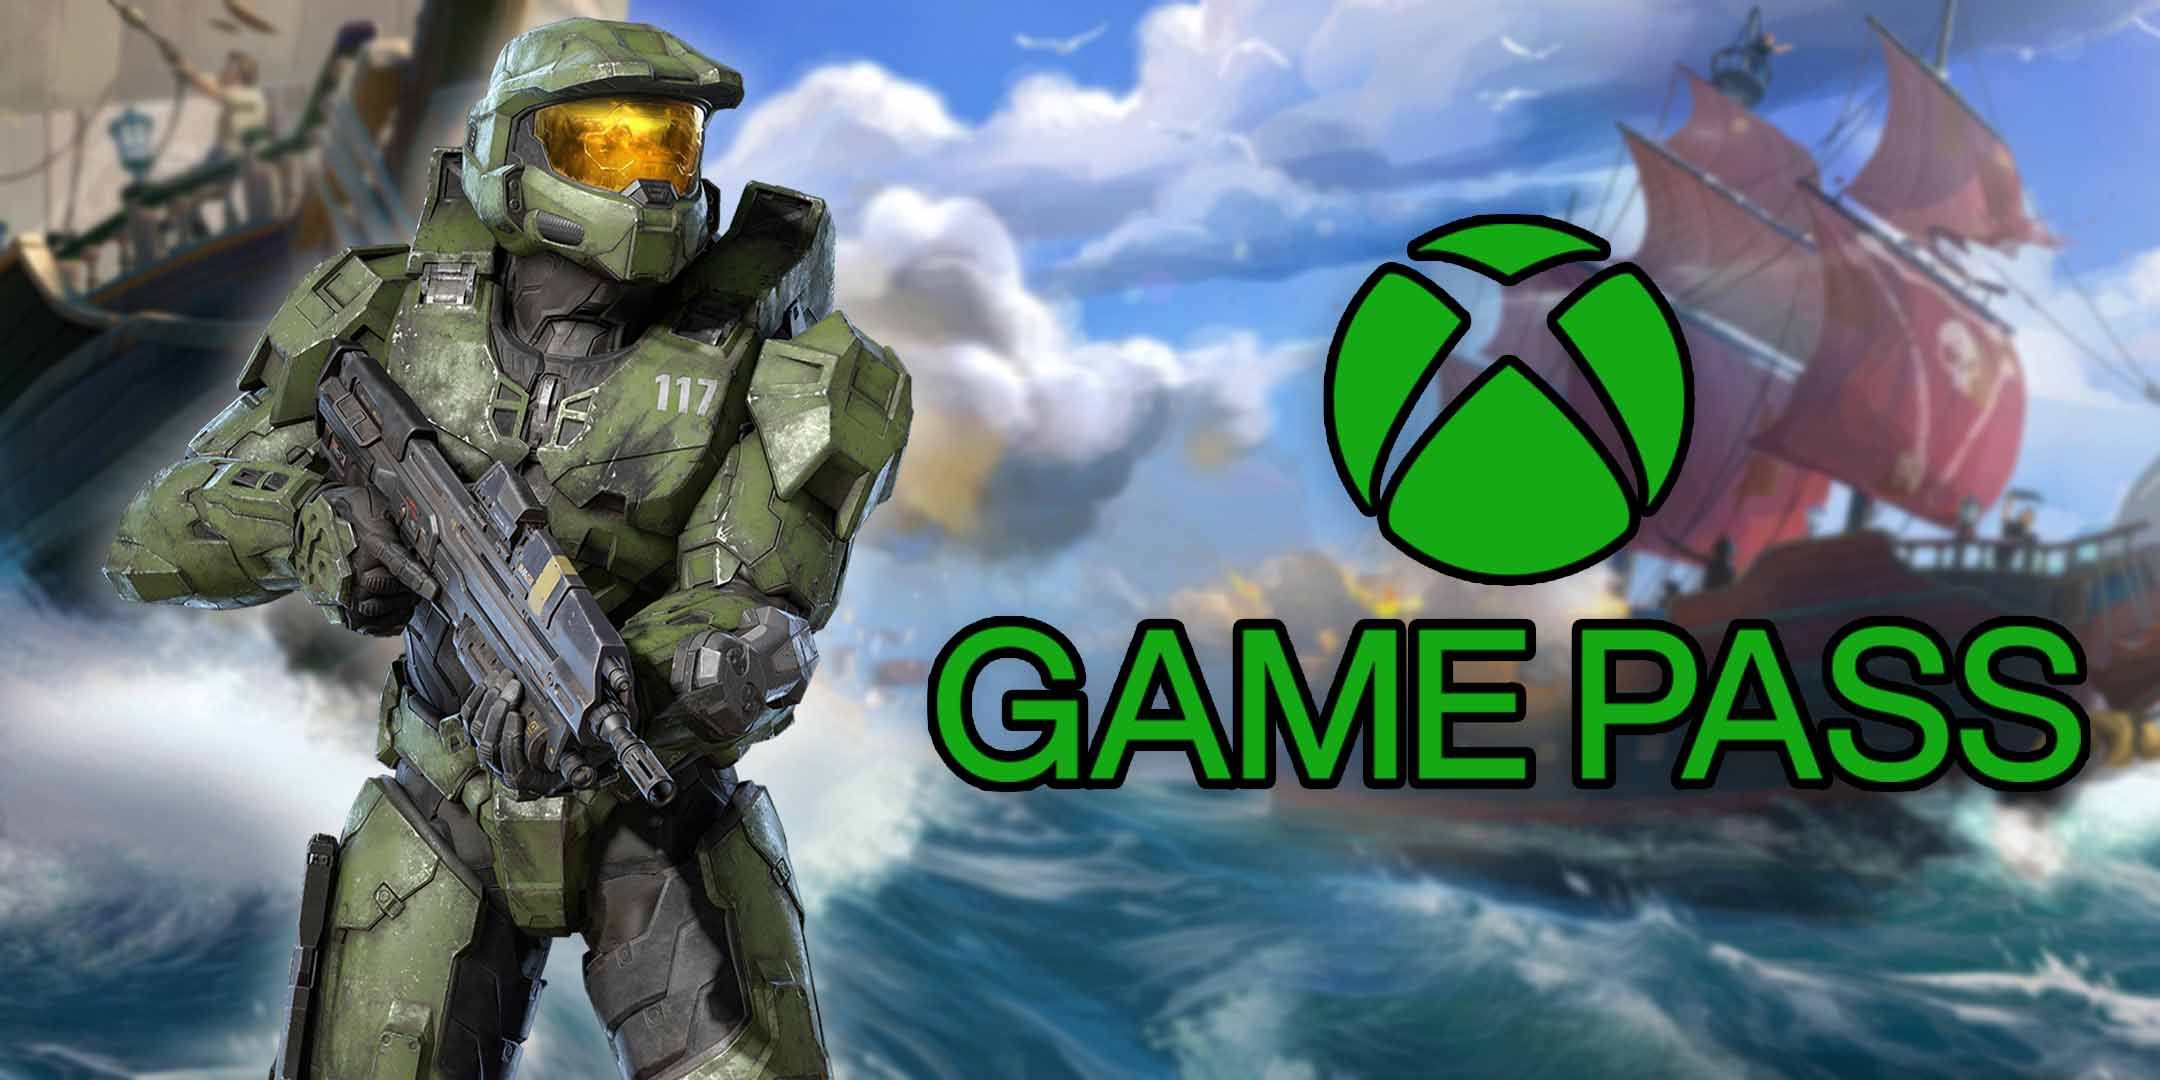 Master Chief and an Xbox Game Pass logo